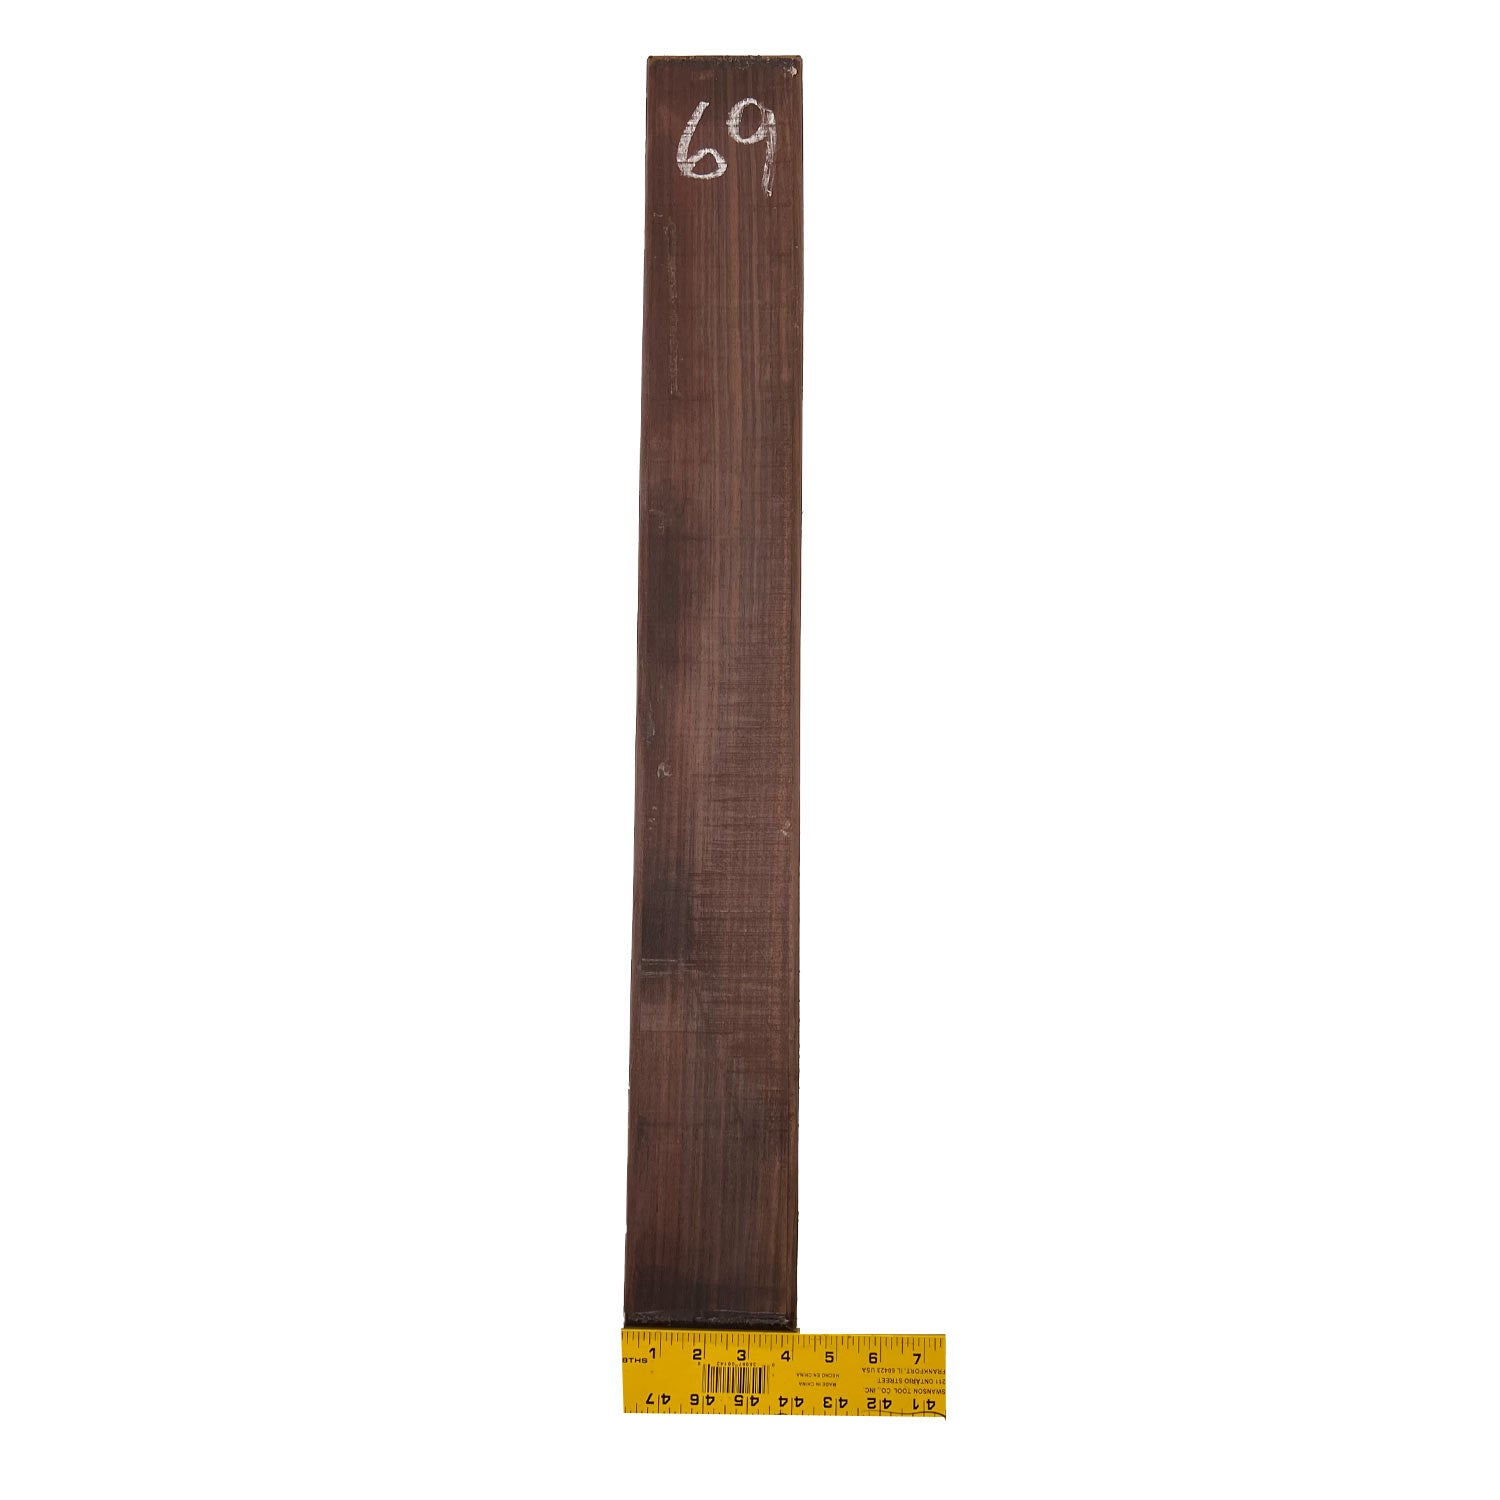 East Indian Rosewood Electrical/ Bass Wood Guitar Neck Blank 31&quot;x4&quot;x1 1/4&quot; 